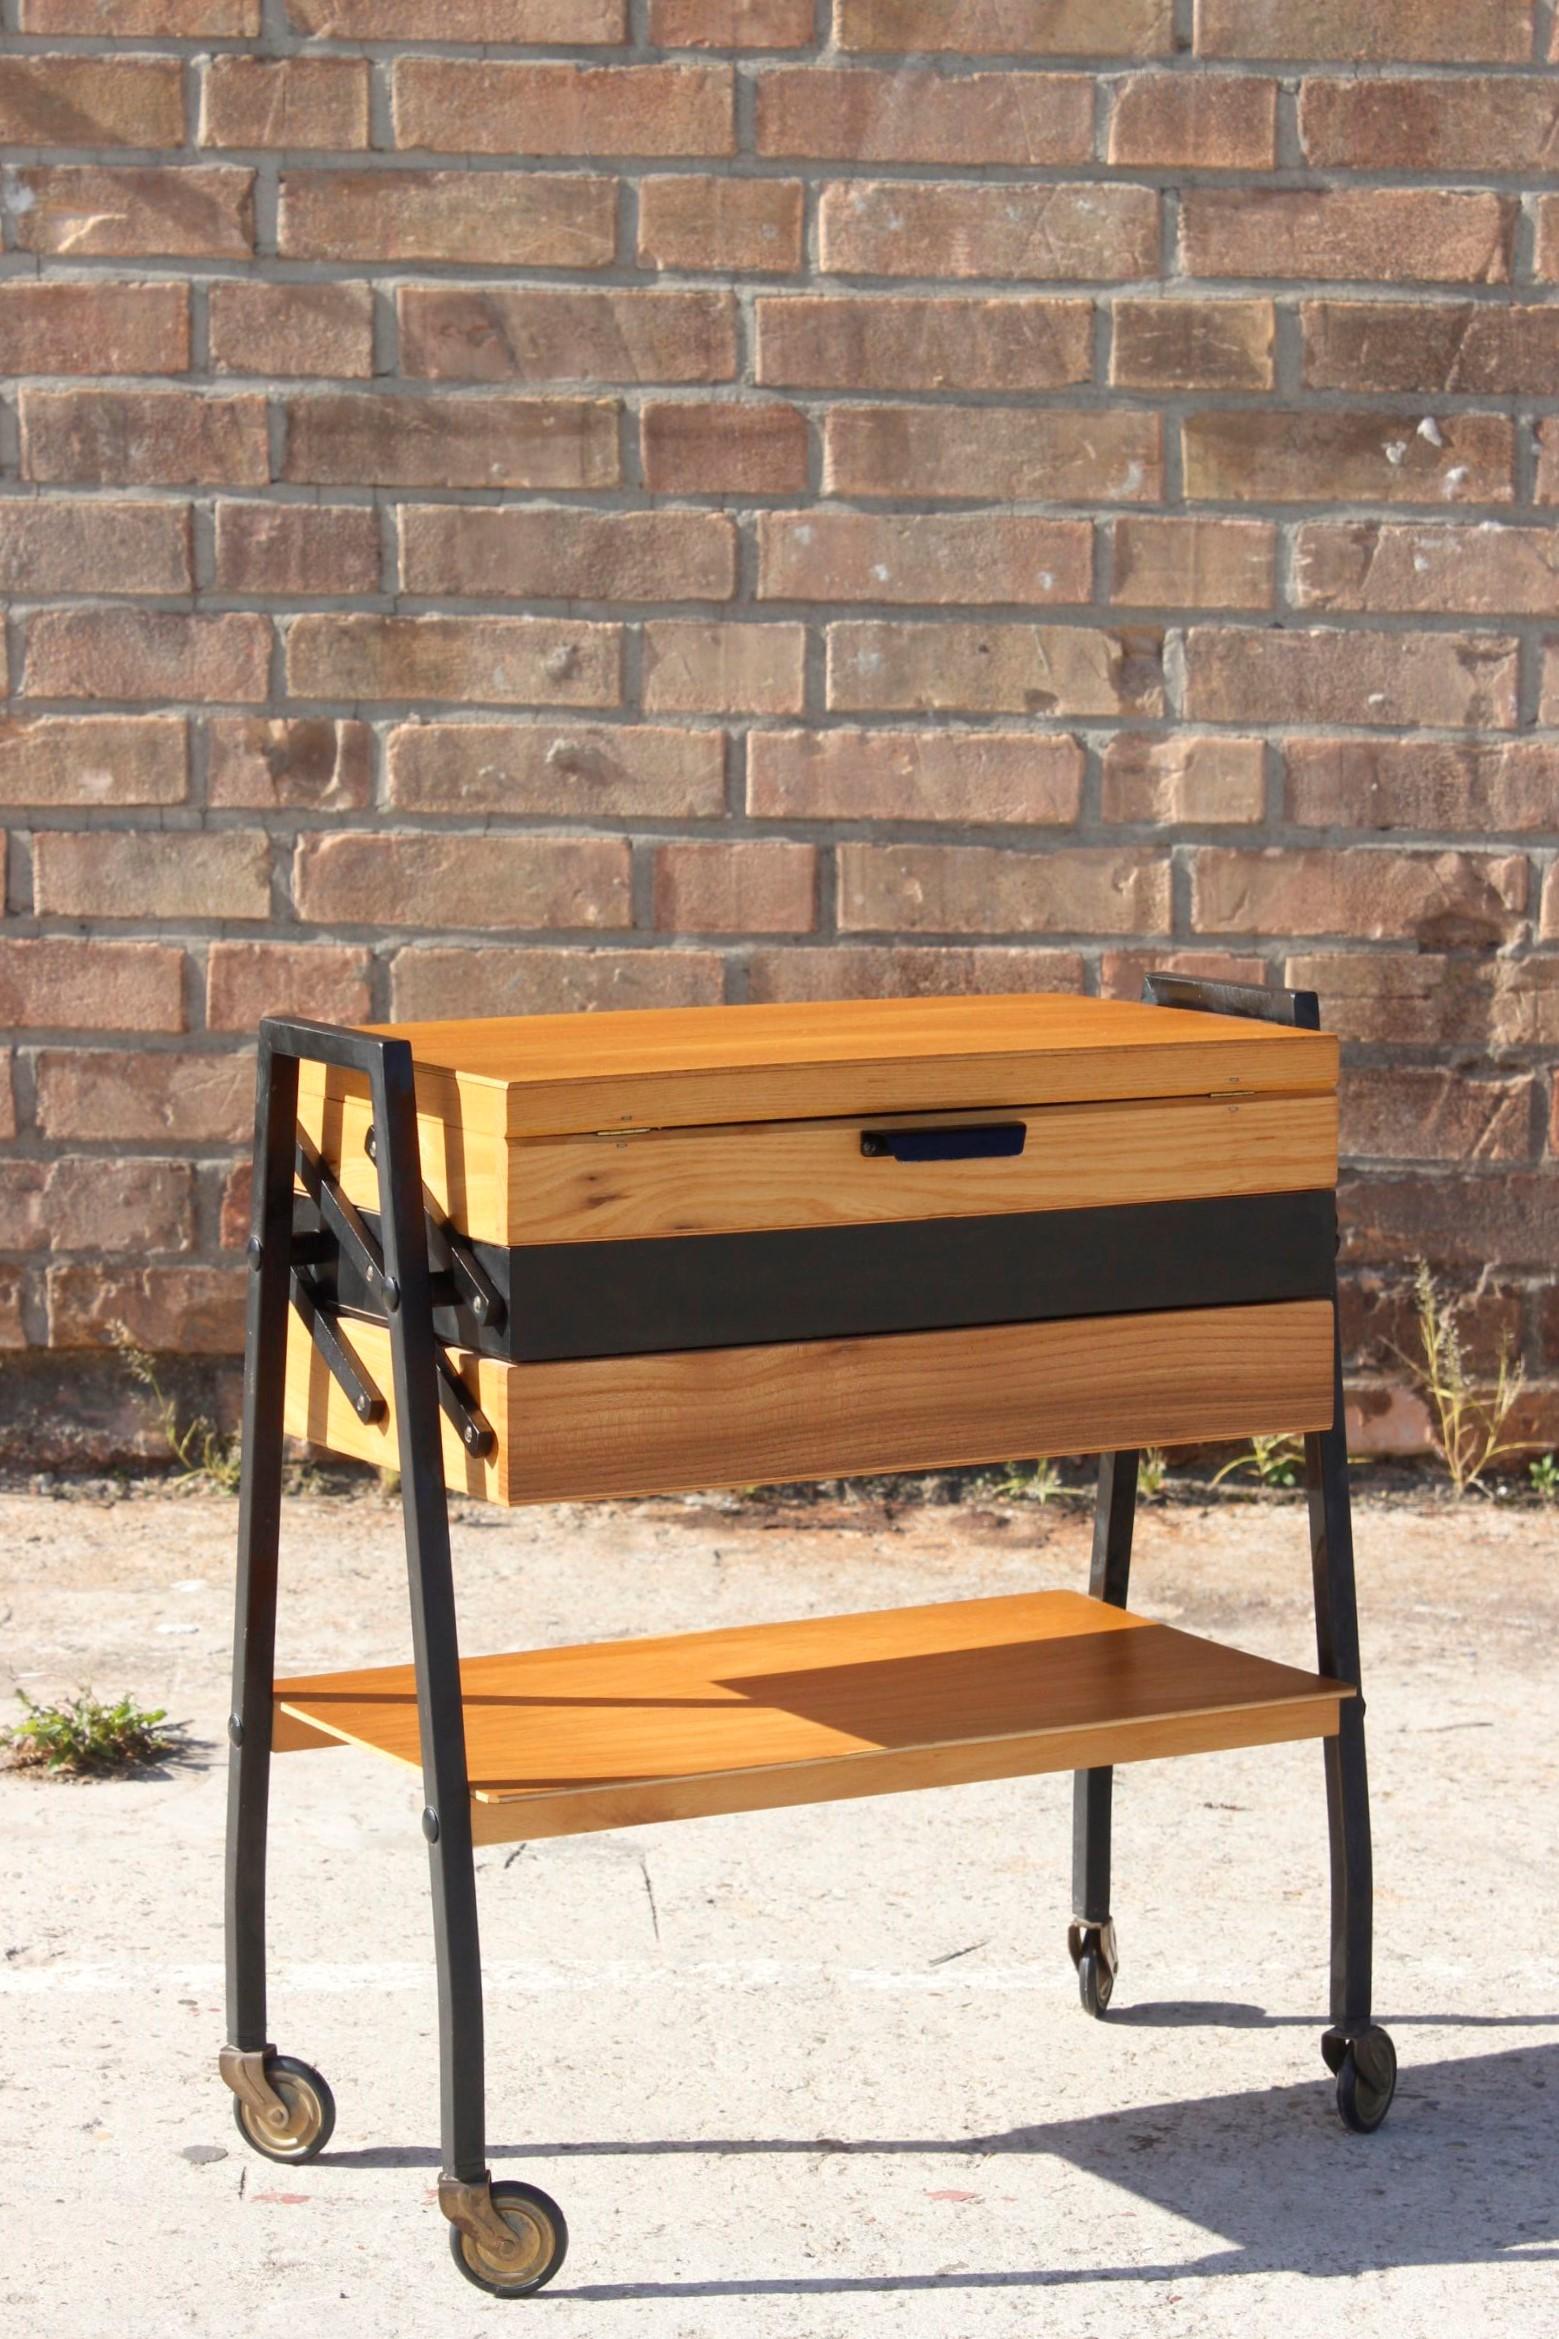 Mid-century modern sewing table on wheels, made out of light varnished wood and steel painted black. 

Unfolds into several compartments for organizing sewing equipment, also has a simple drawer. 

Can be used for its original purpose or as a